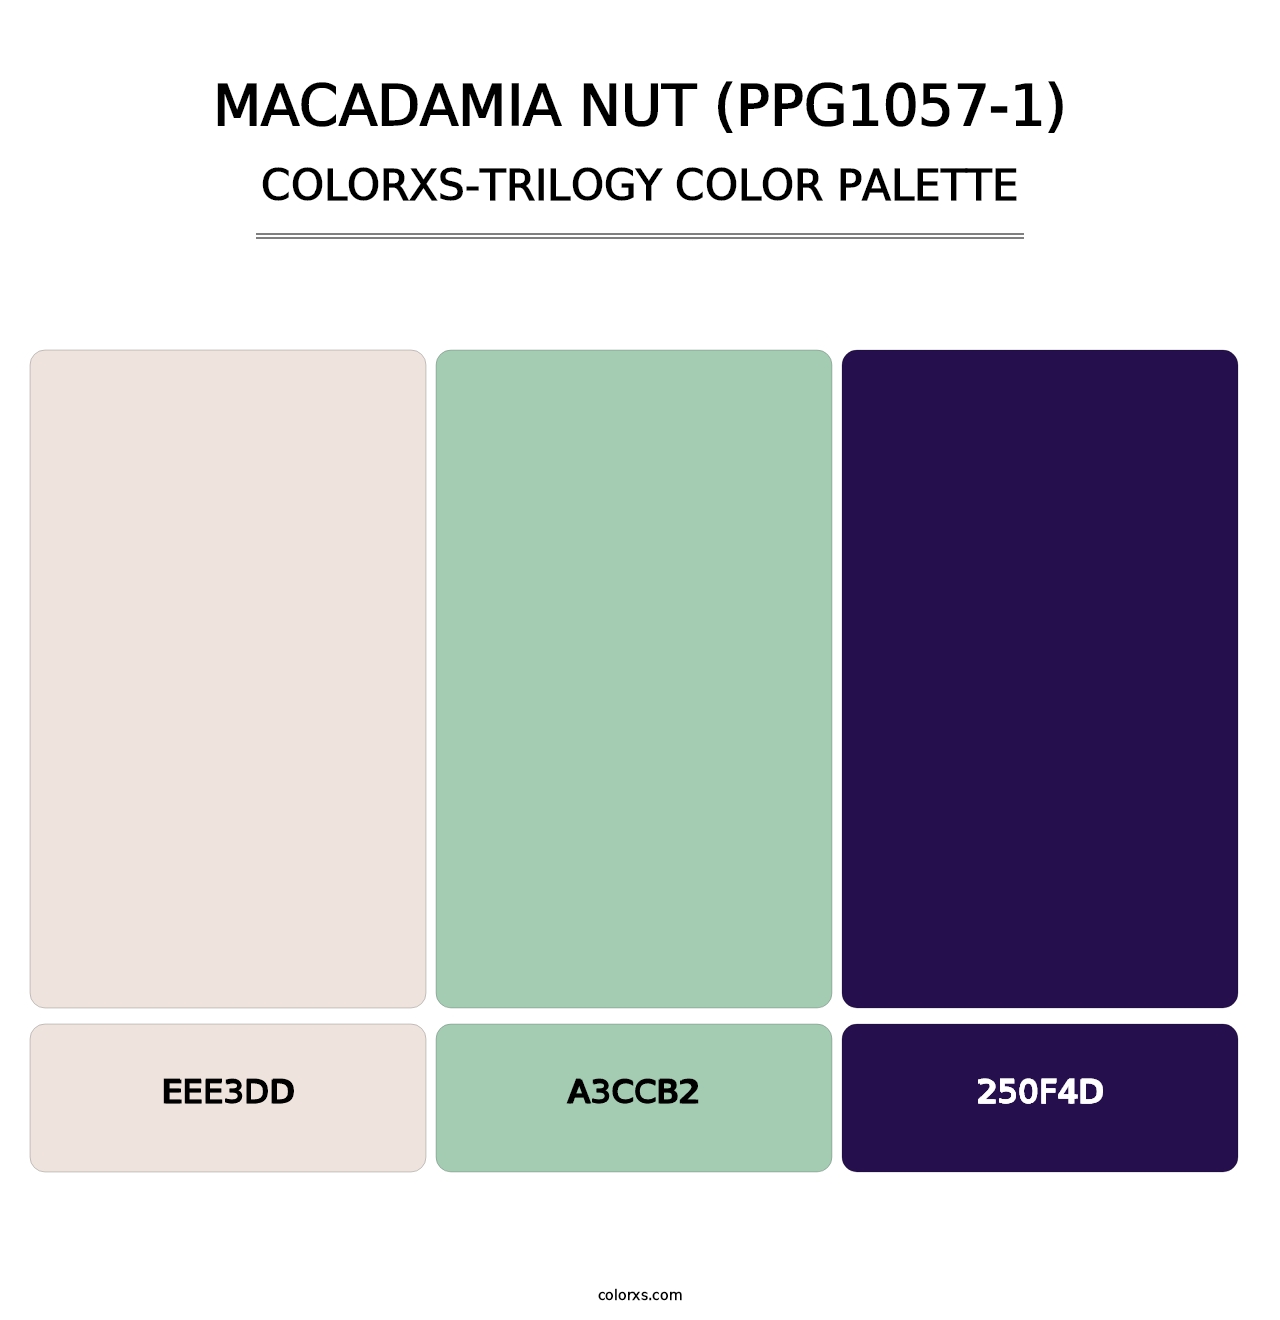 Macadamia Nut (PPG1057-1) - Colorxs Trilogy Palette